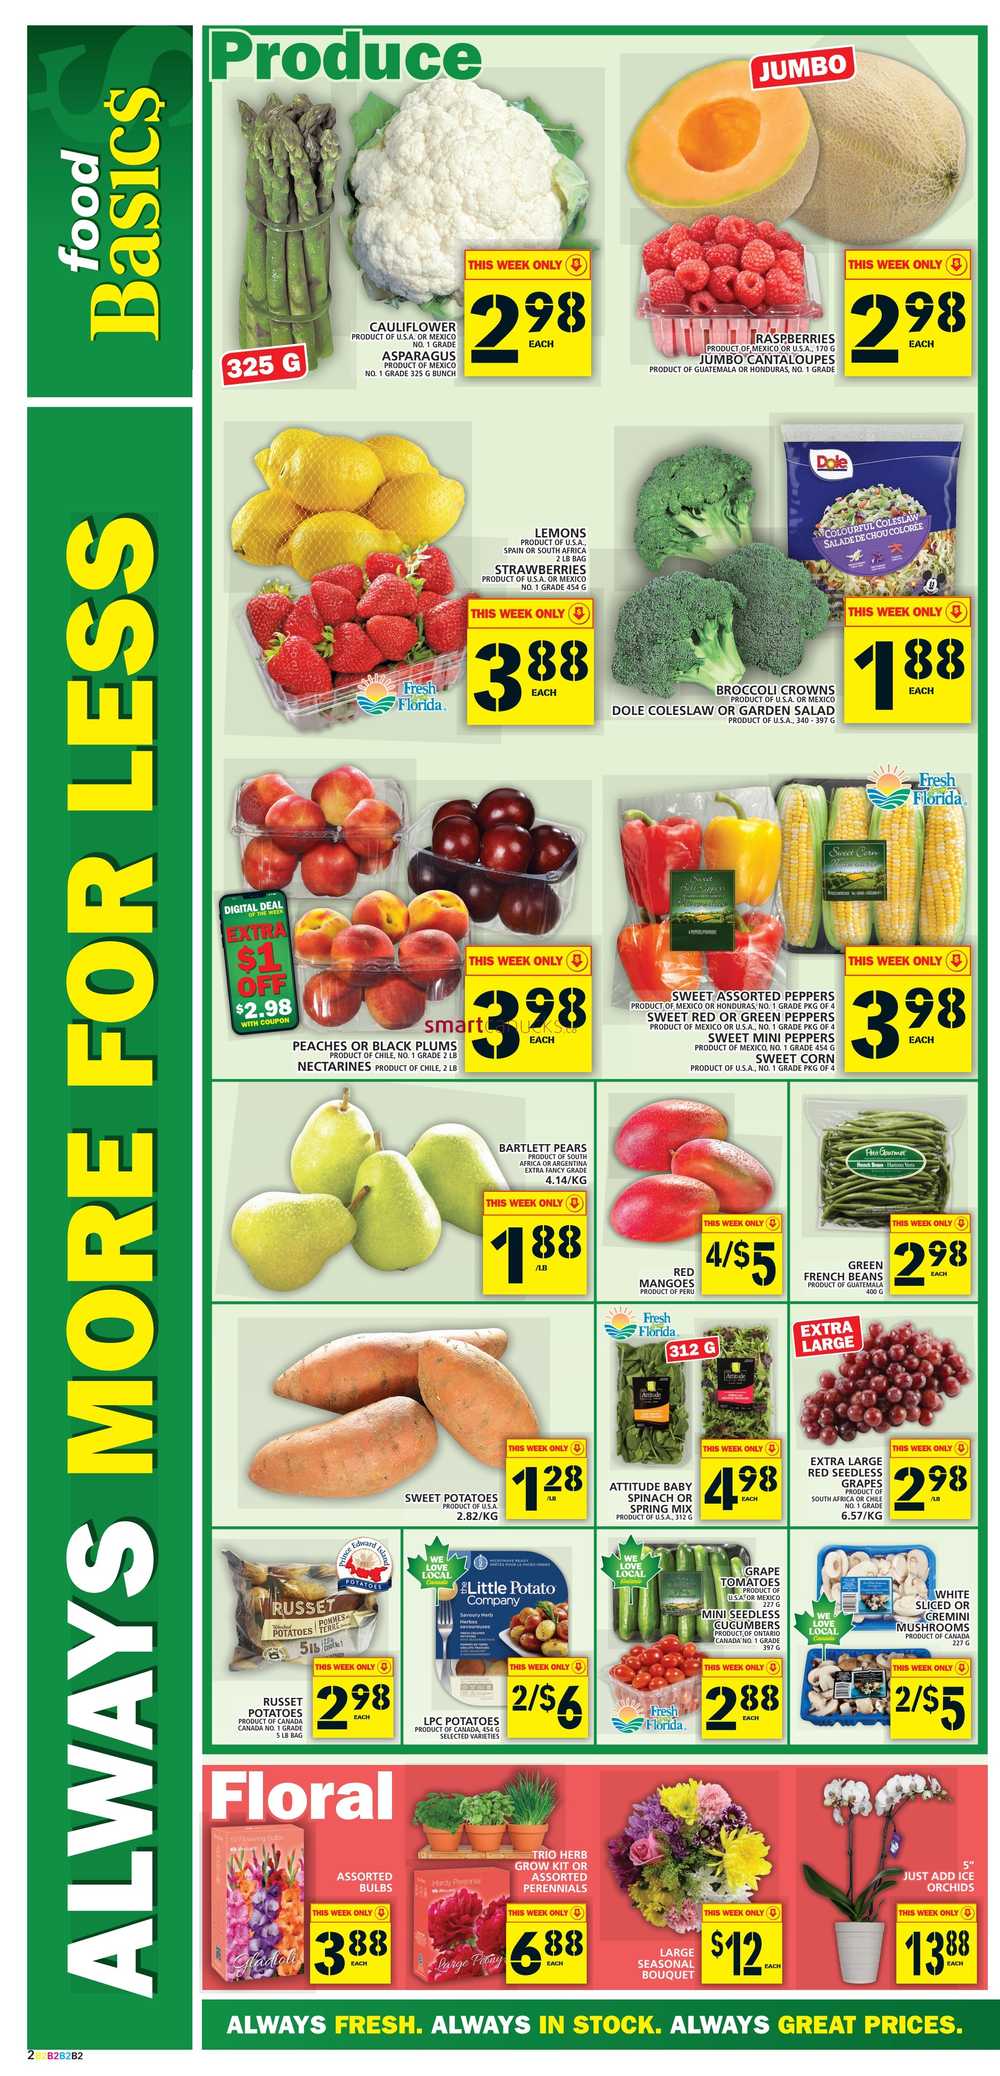 Food Basics Flyer March 24 to 30